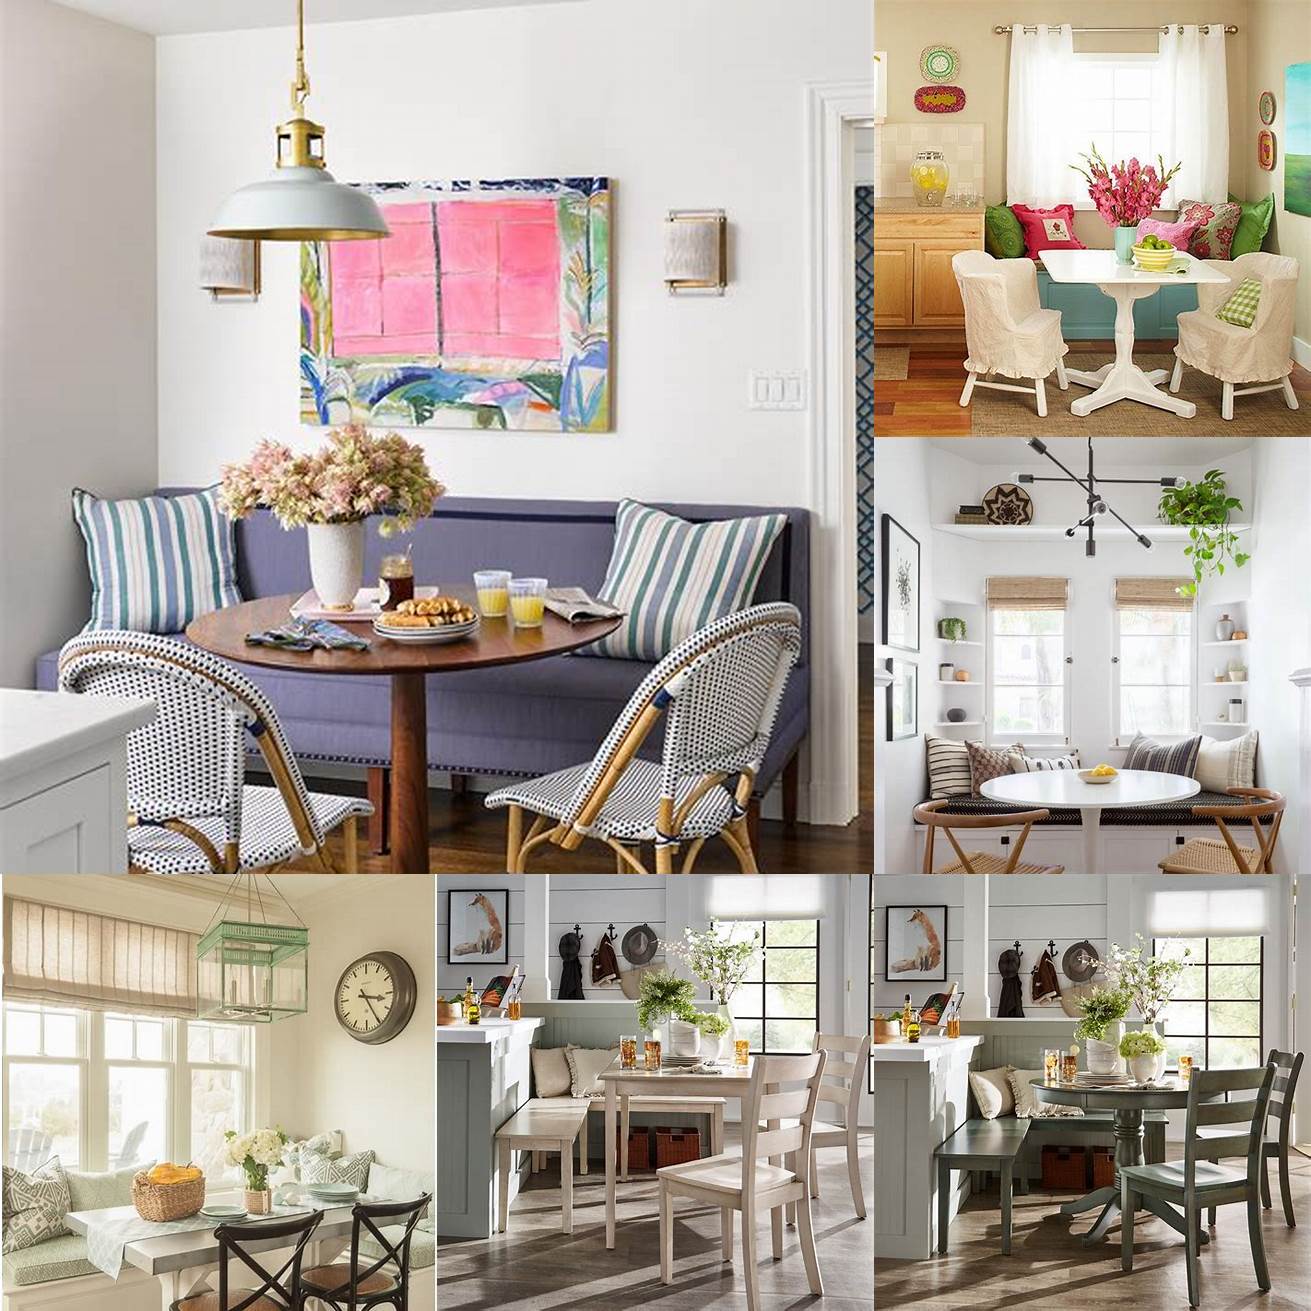 A cozy breakfast nook with a vintage table and mismatched chairs